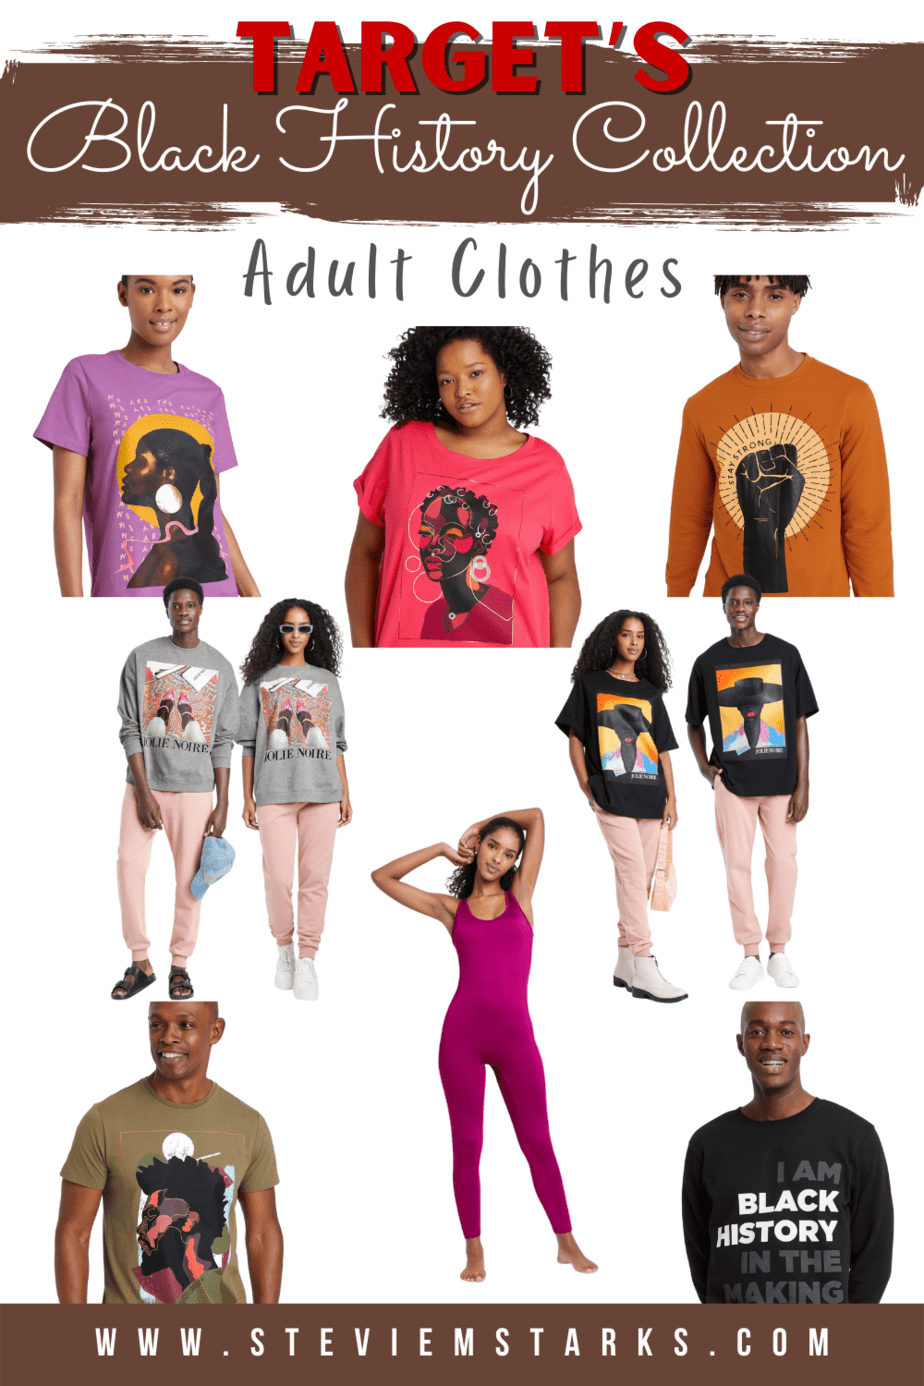 Target Black History Collection Adult Clothing